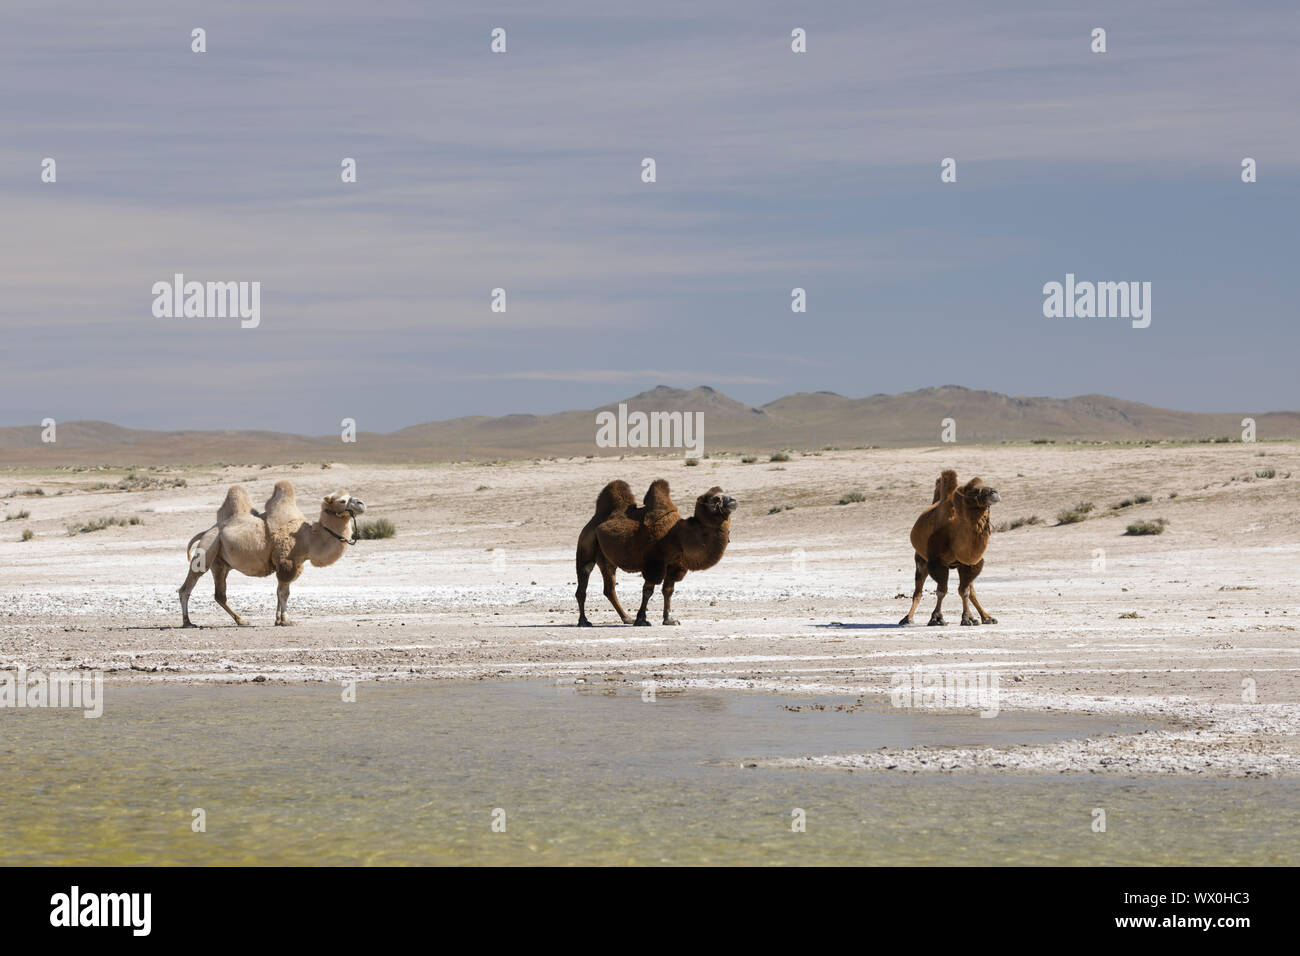 Camels in the Mongolian wilderness, Mongolia, Central Asia, Asia Stock Photo